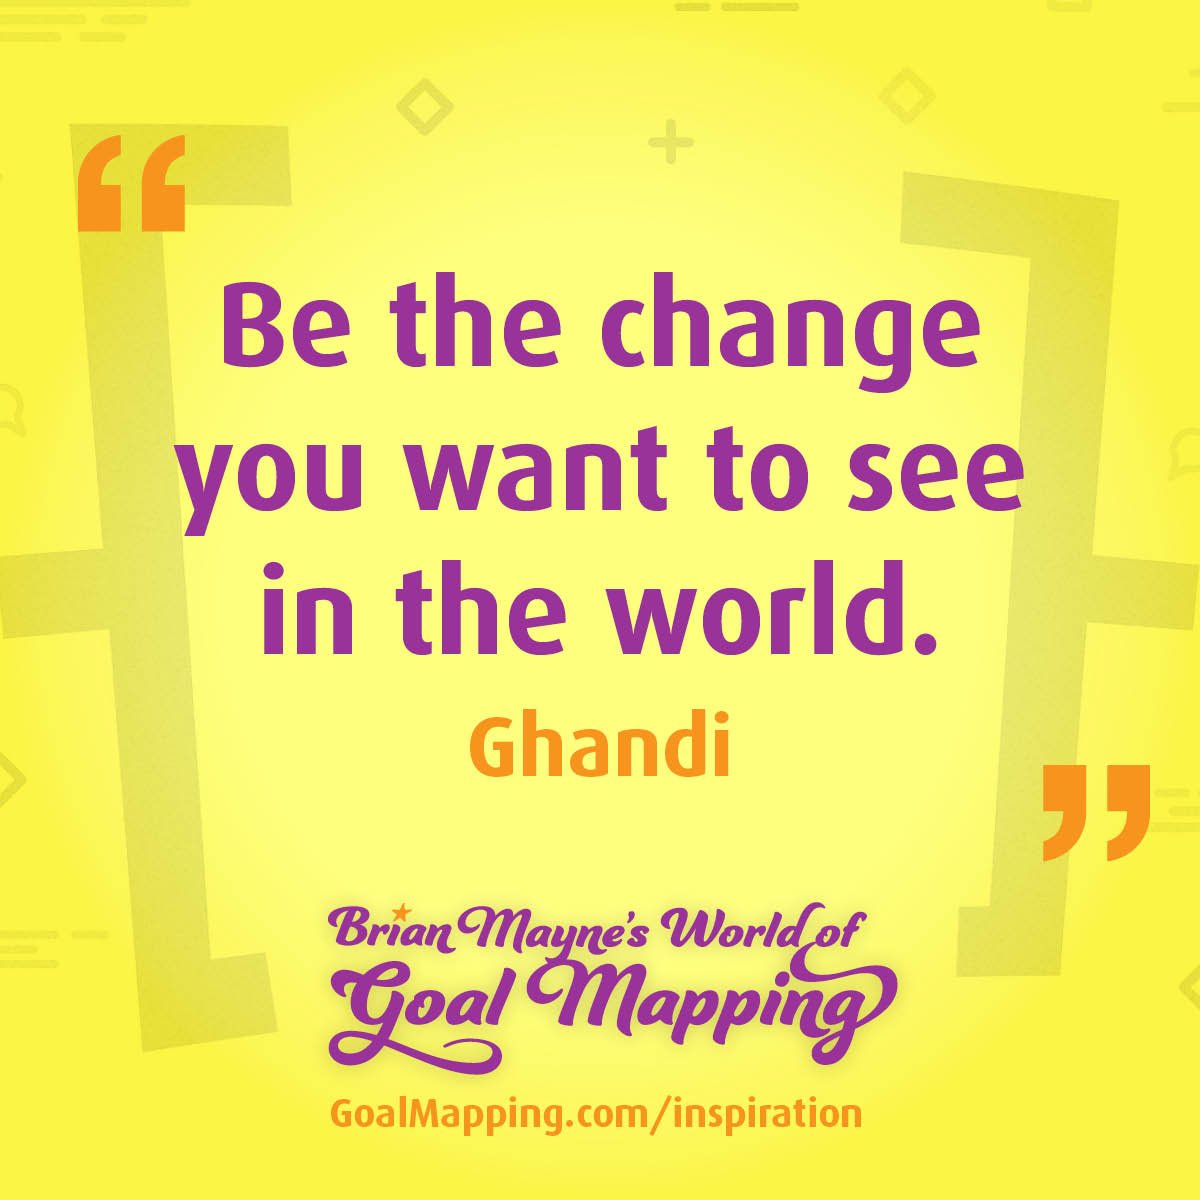 "Be the change you want to see in the world." Ghandi